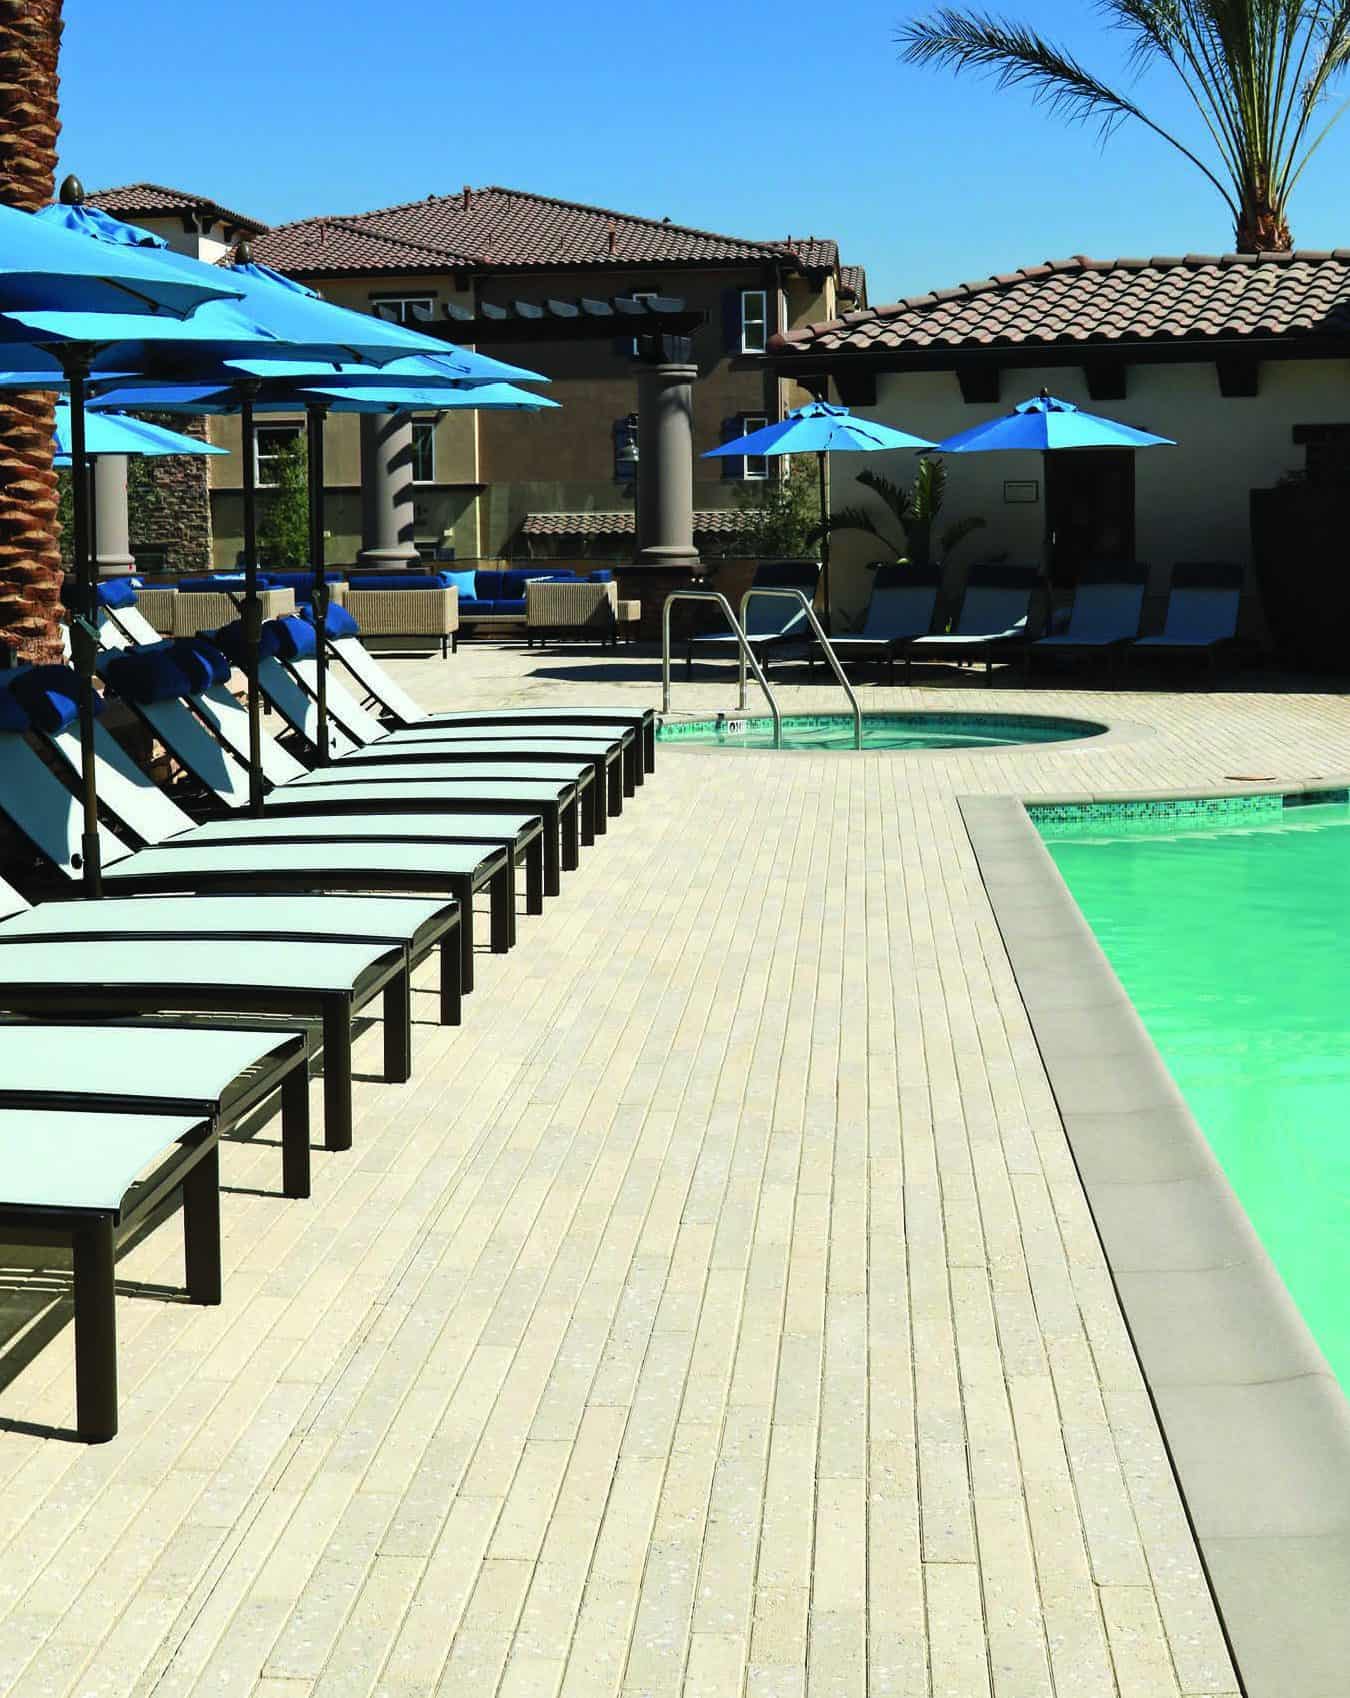 Concrete Pavers_AckerStone_AZ_3 x 24 in Stanford Sand FM with Shells, 50% Grind Finish & 50% Grind & Shot Blast Finish_Page_154_Image_0001